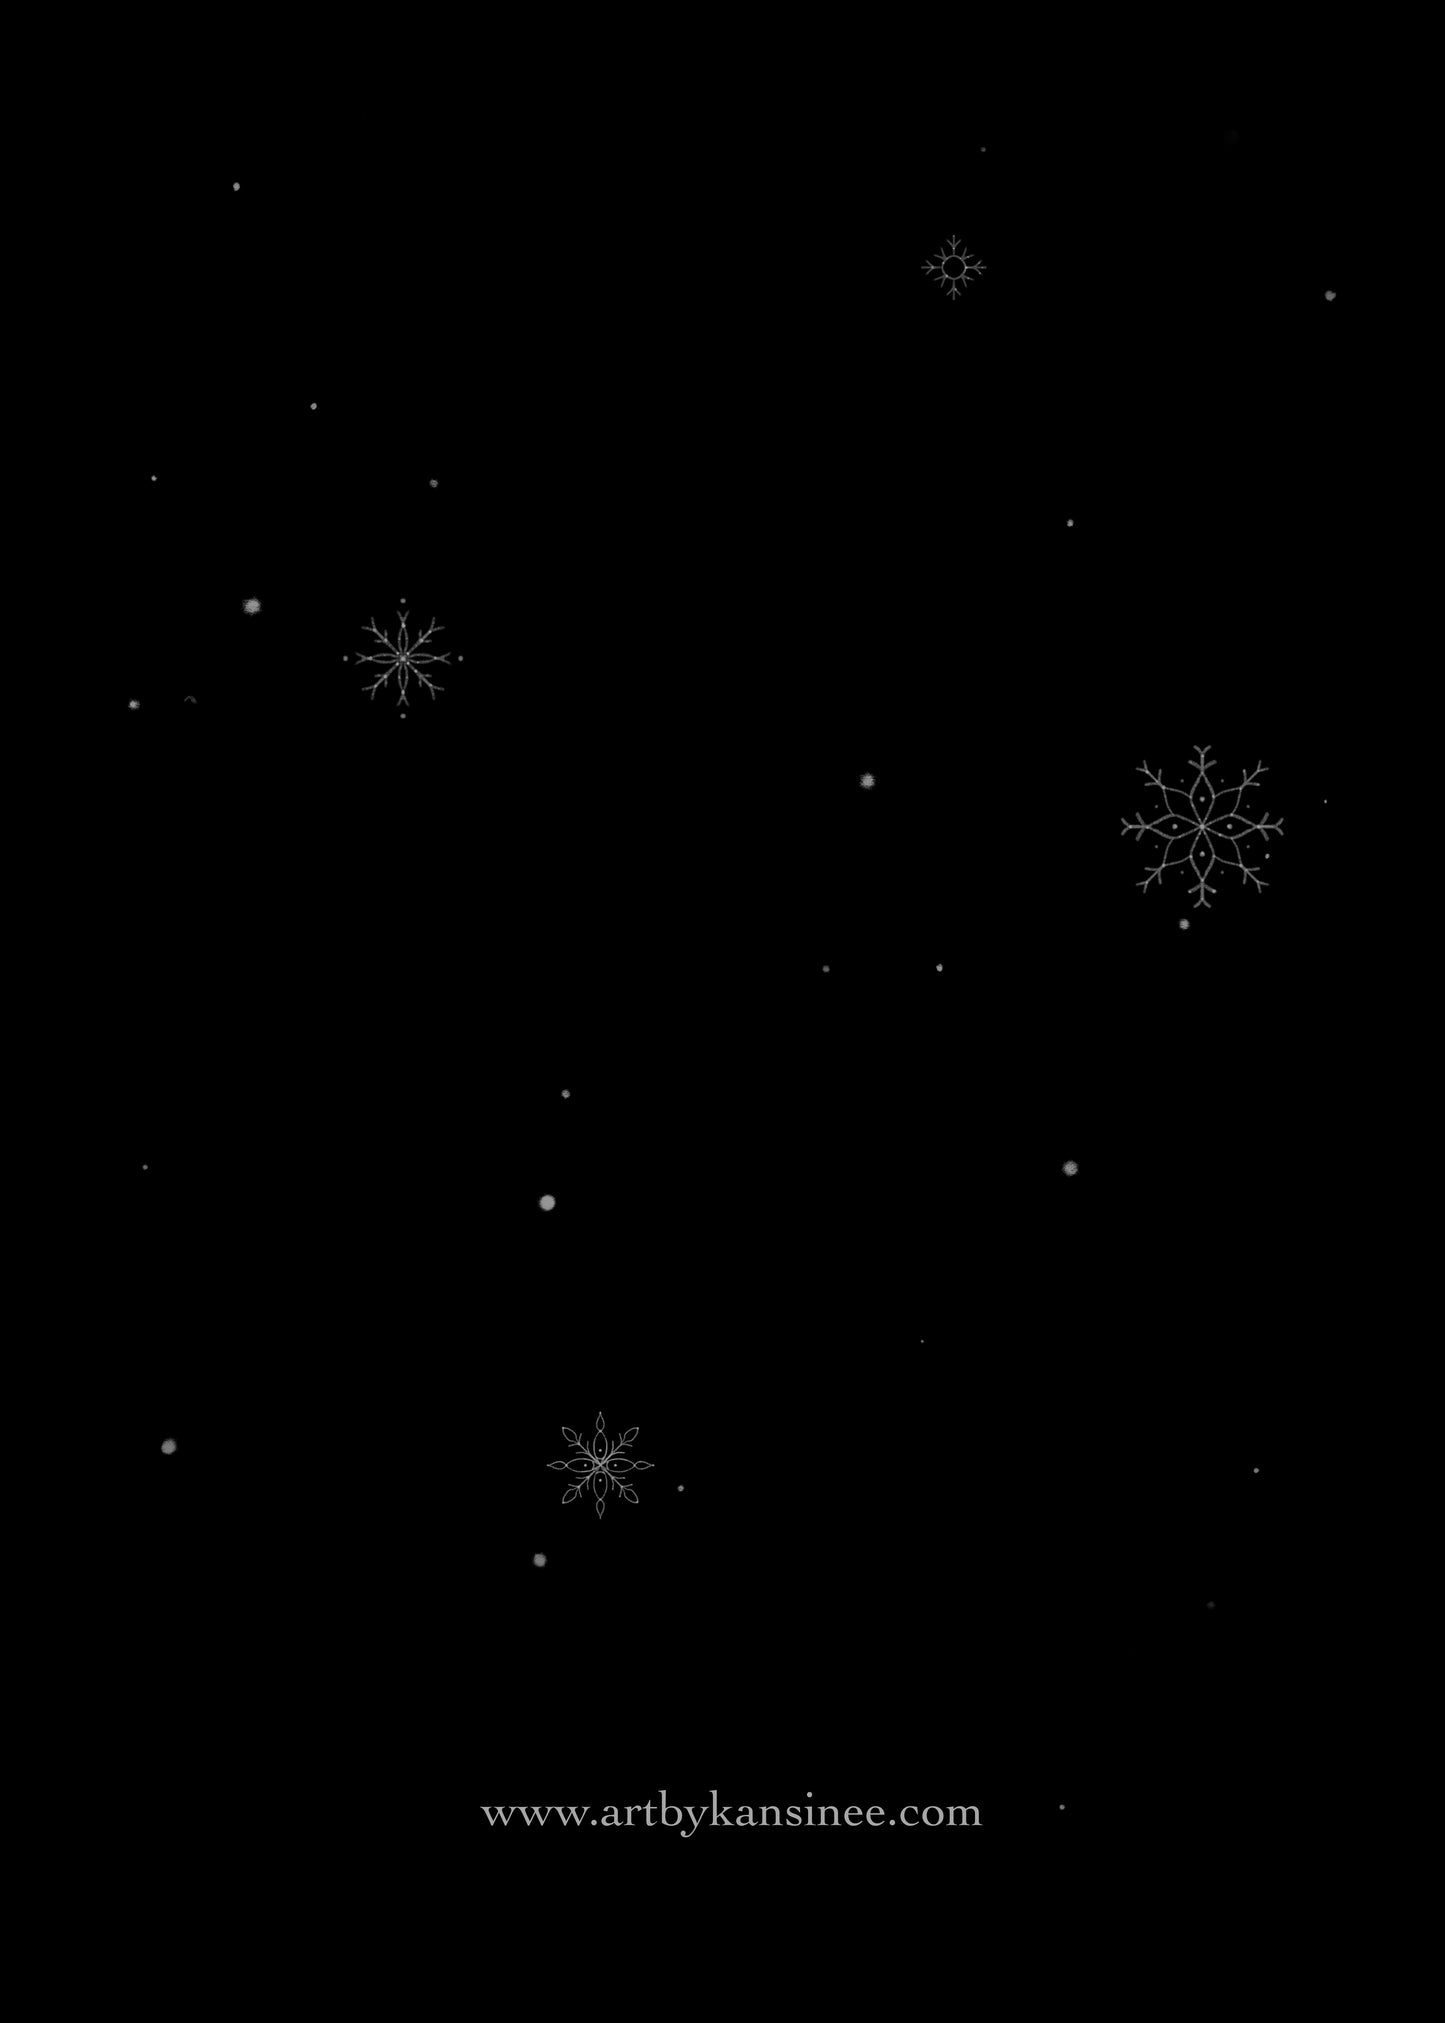 Snowflakes falling on a night sky. The back of the card